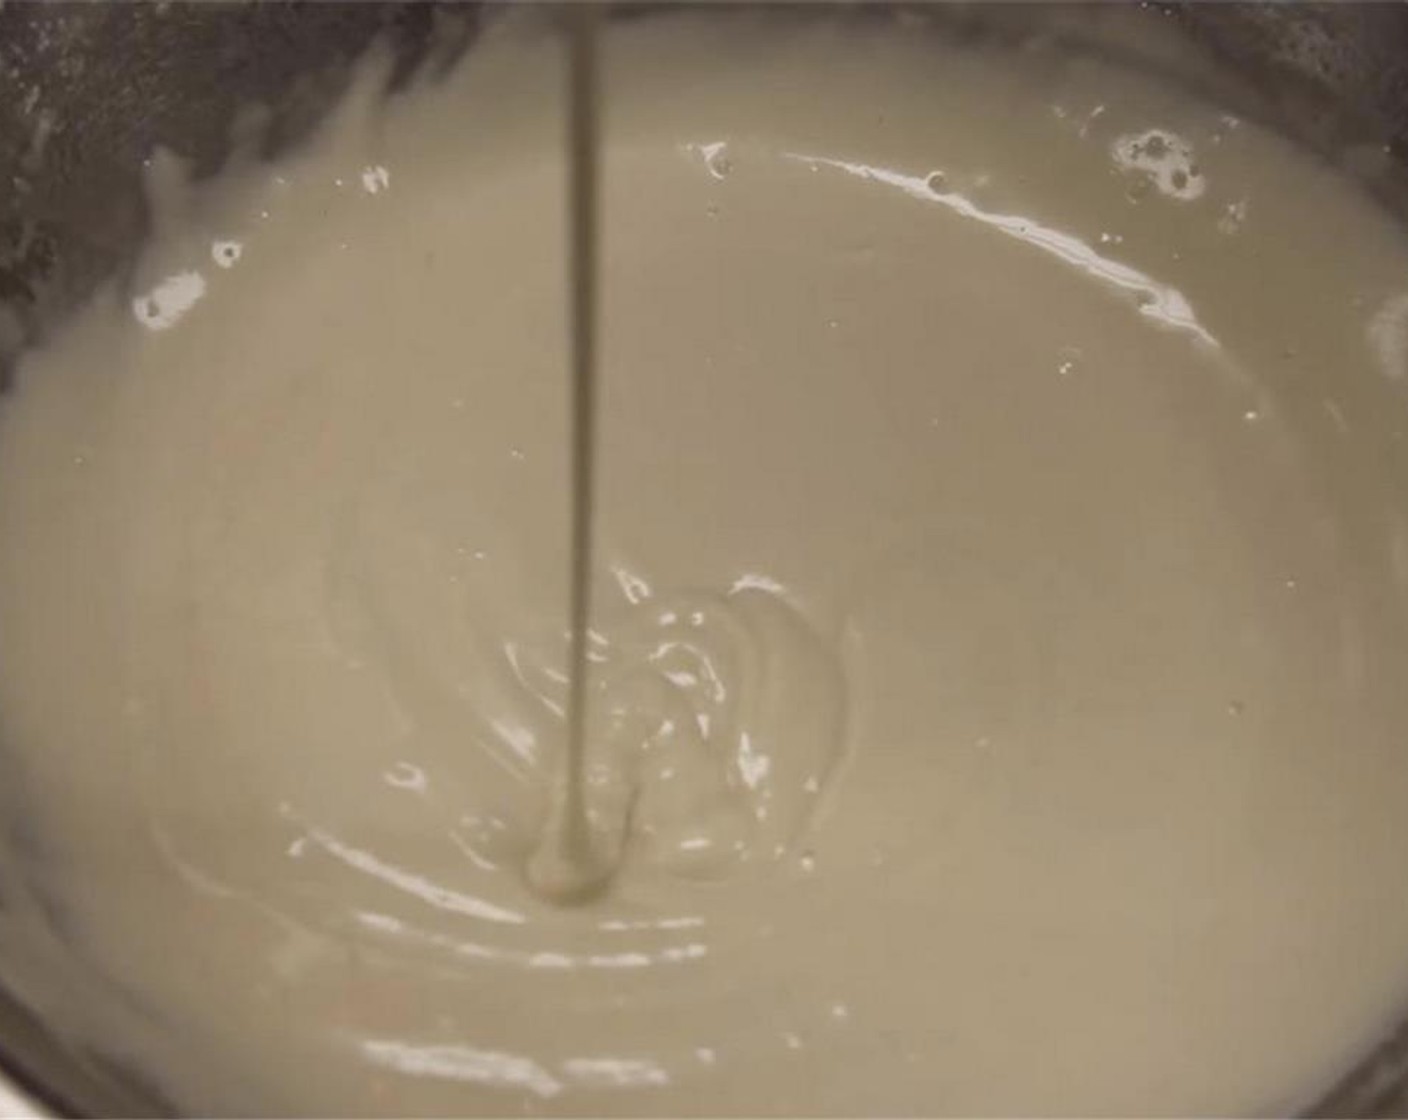 step 5 Whisk in Baking Powder (1/2 Tbsp), Corn Starch (1/2 cup) and All-Purpose Flour (3/4 cup). Finally, mix in the Vegetable Oil (2 Tbsp) oil.